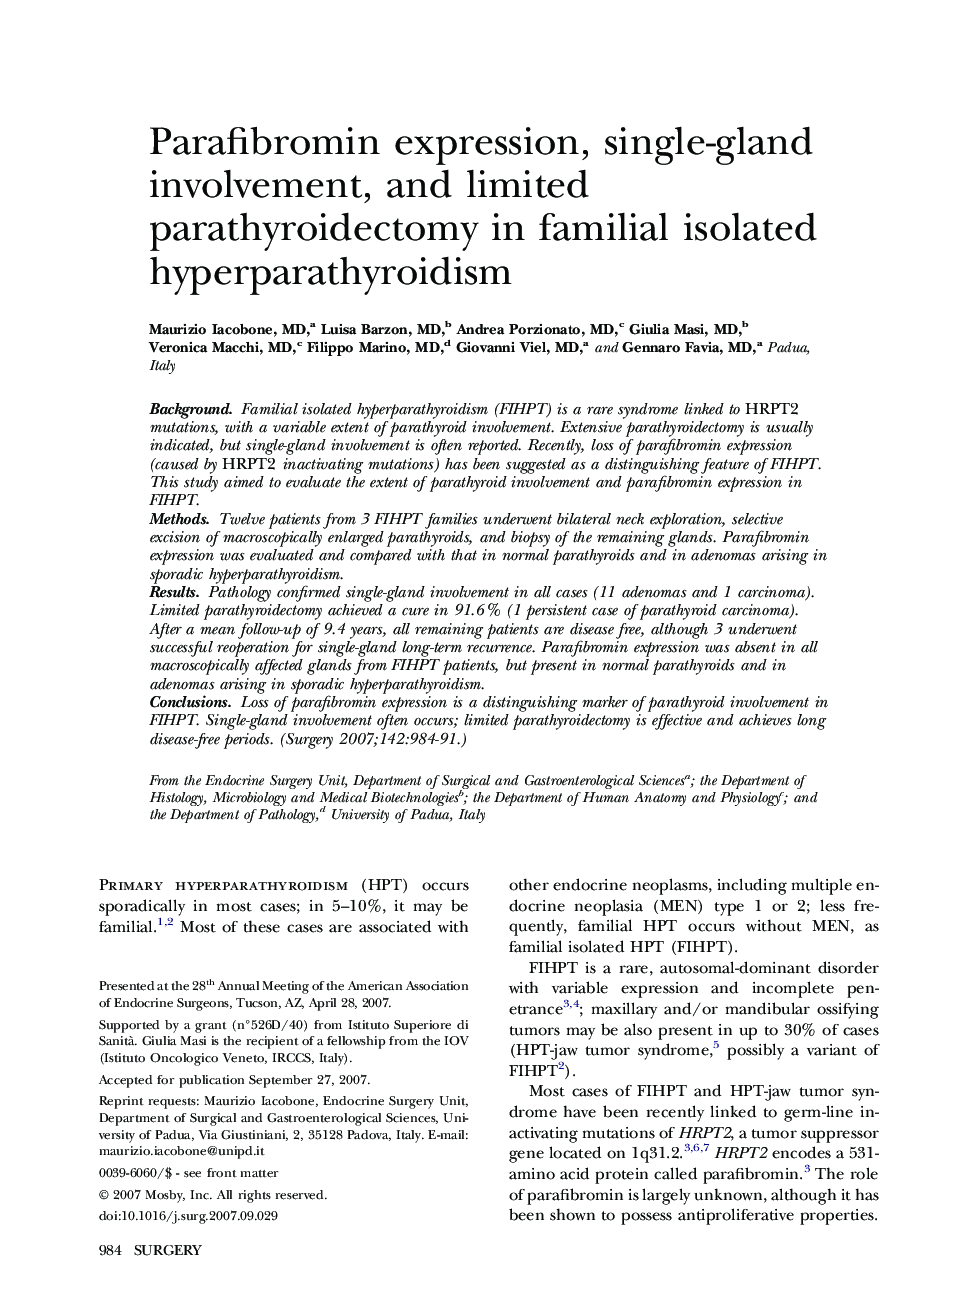 Parafibromin expression, single-gland involvement, and limited parathyroidectomy in familial isolated hyperparathyroidism 